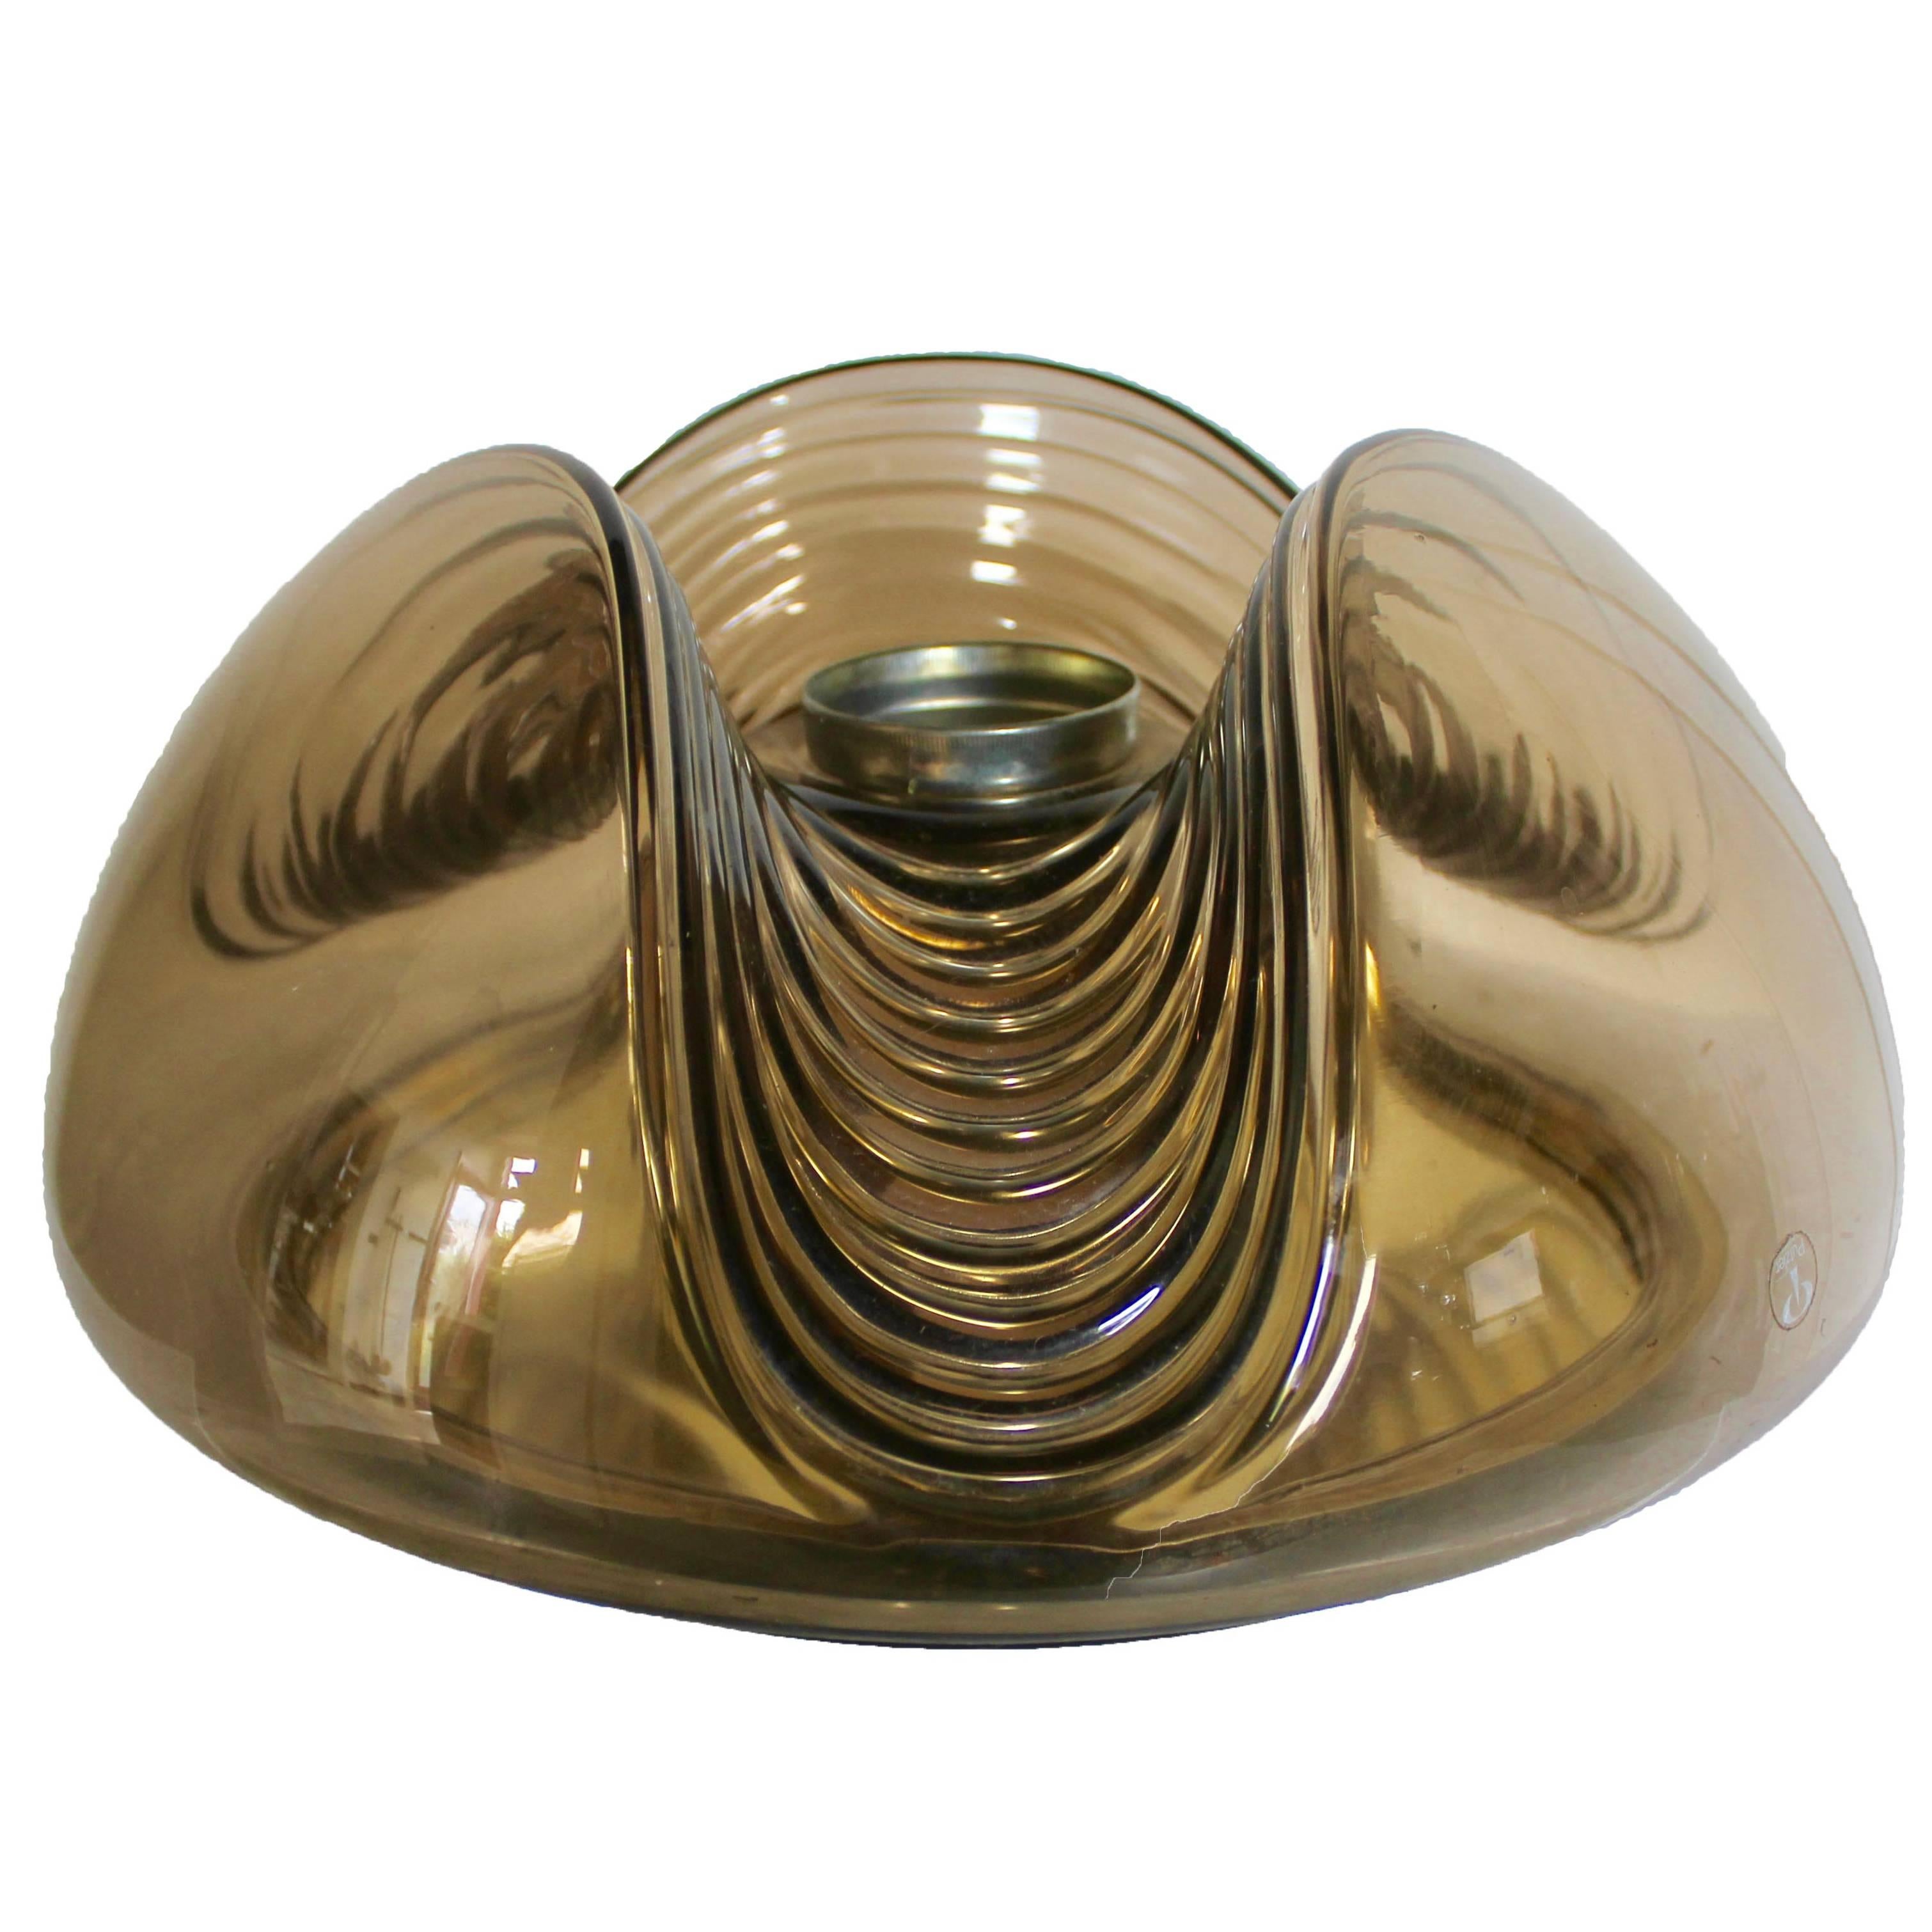 Large, 1970s Smoked Glass Biomorphic Wall Light Sconces by Peill & Putzler